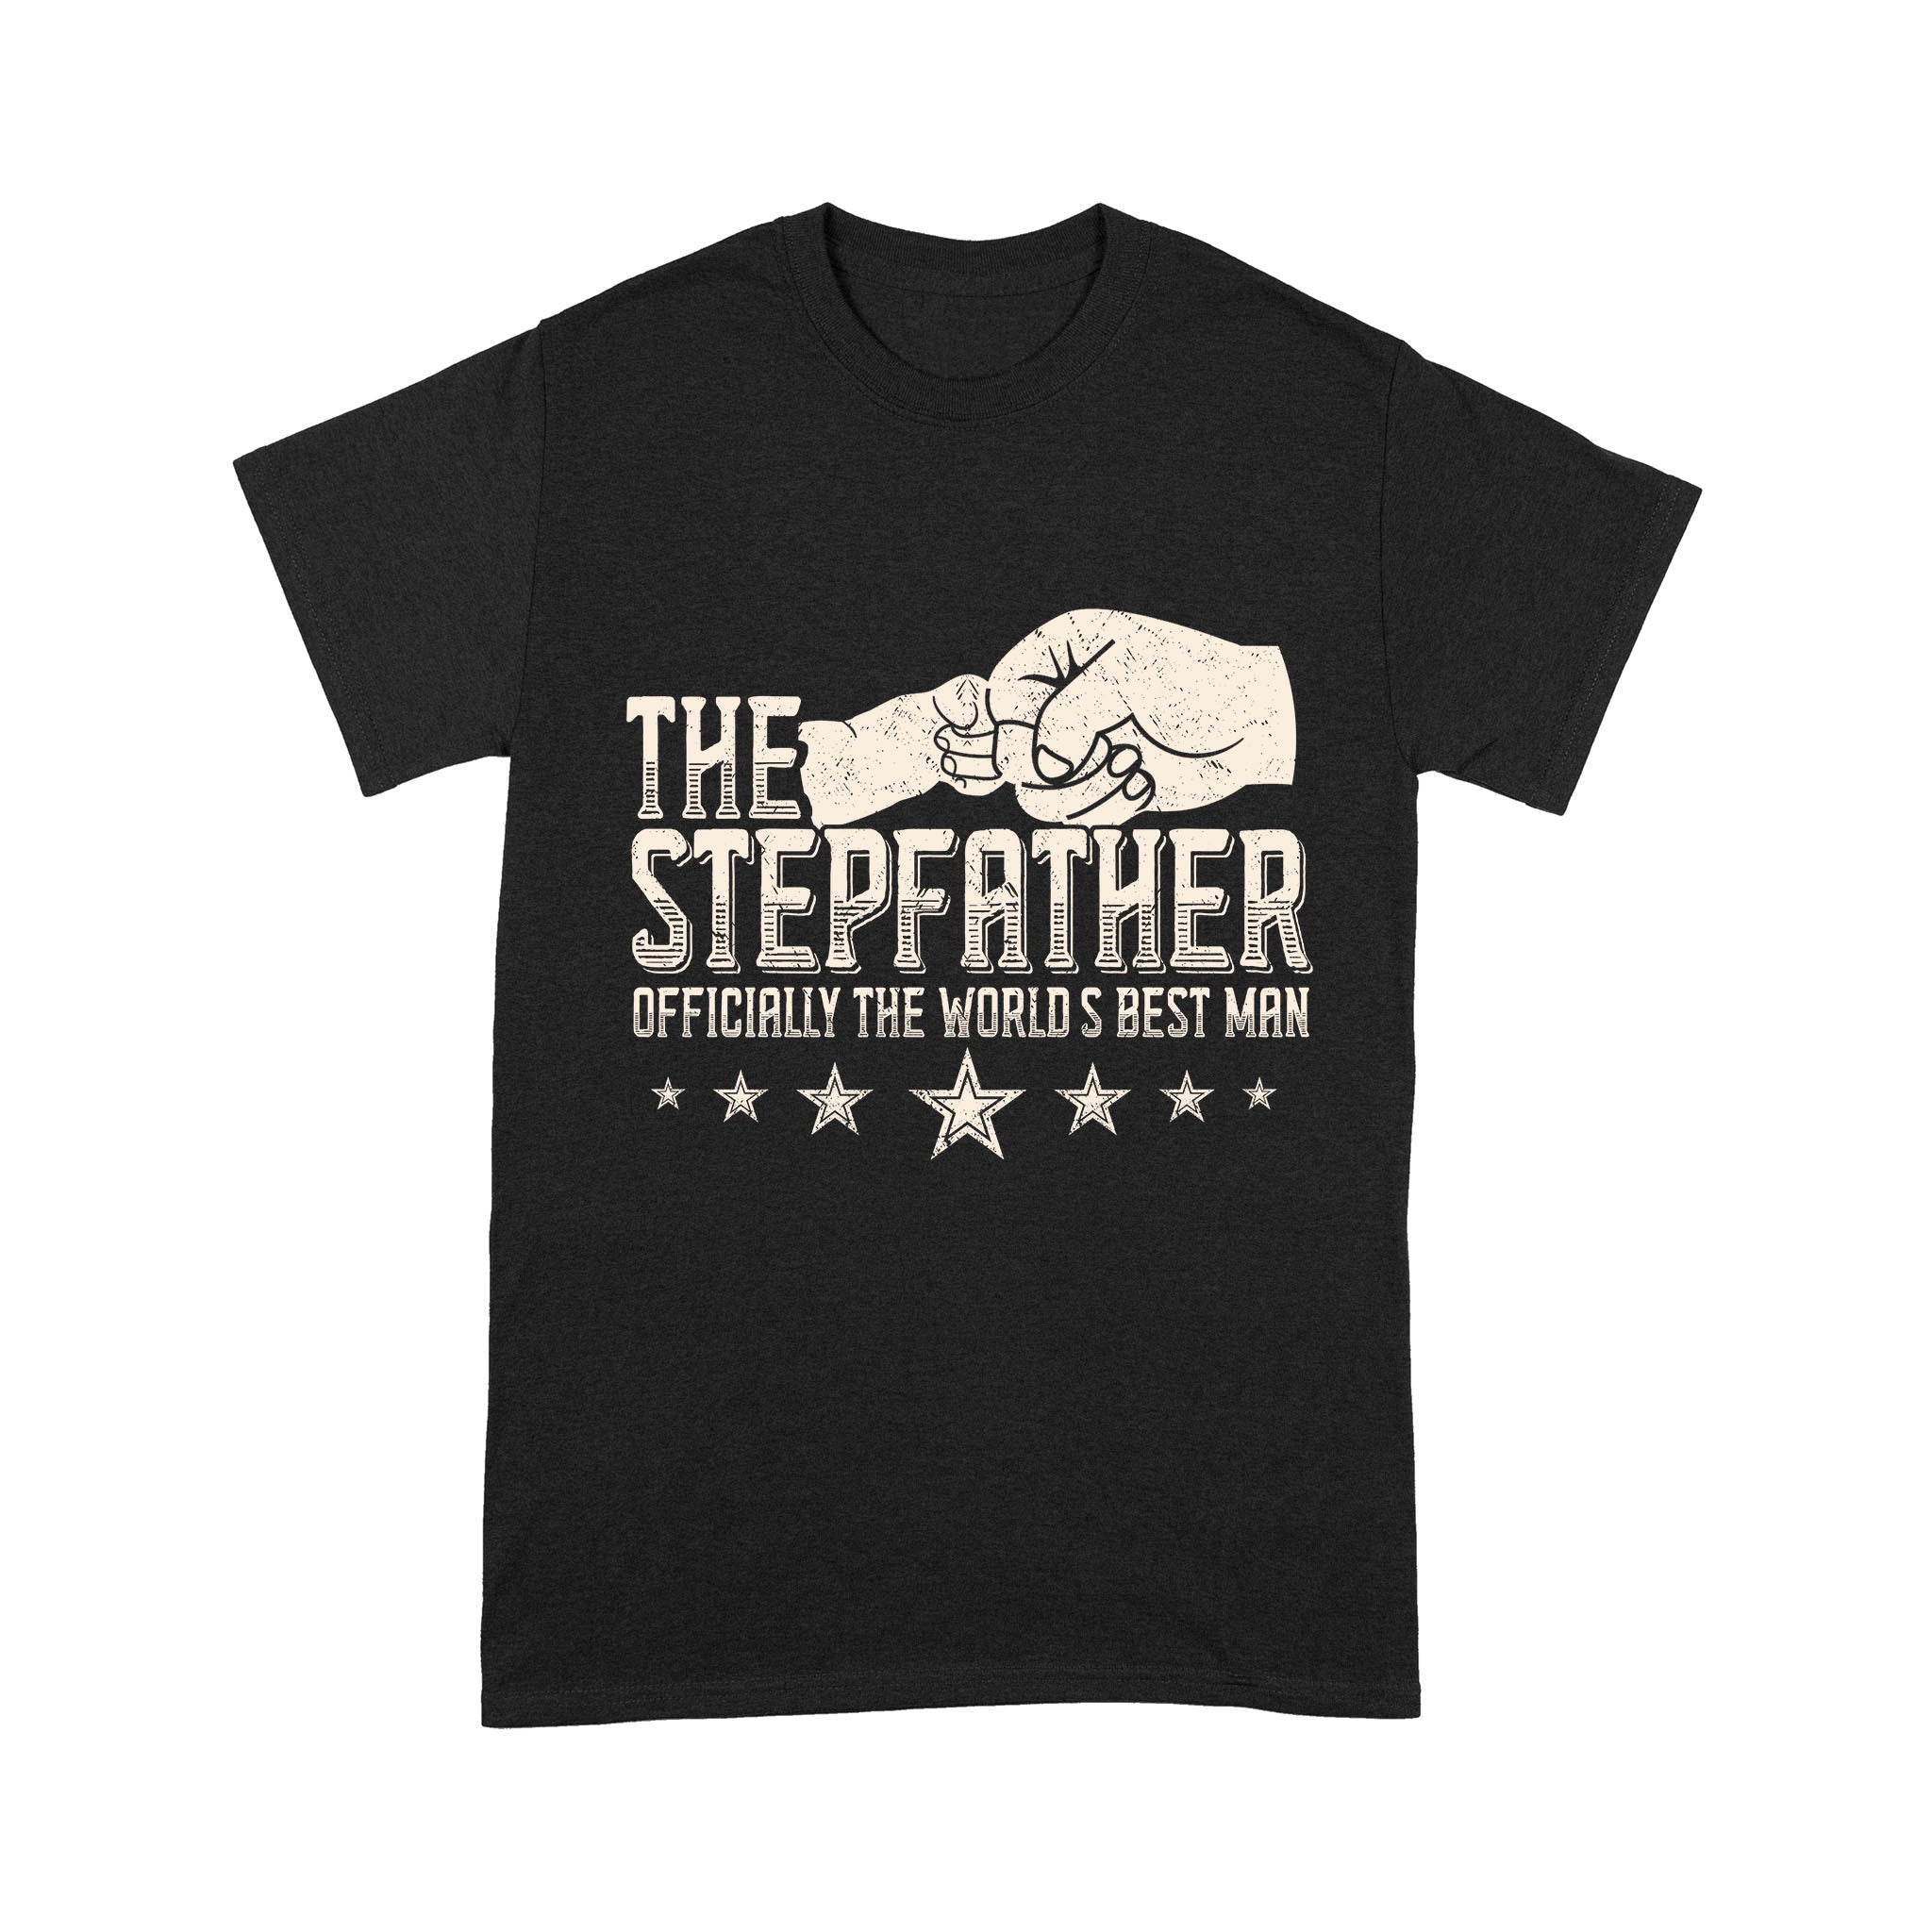 The Stepfather Officially The World's Best Man T-Shirt Gift For Stepdad, Stepfather, Bonus Dad Myfihu TN6